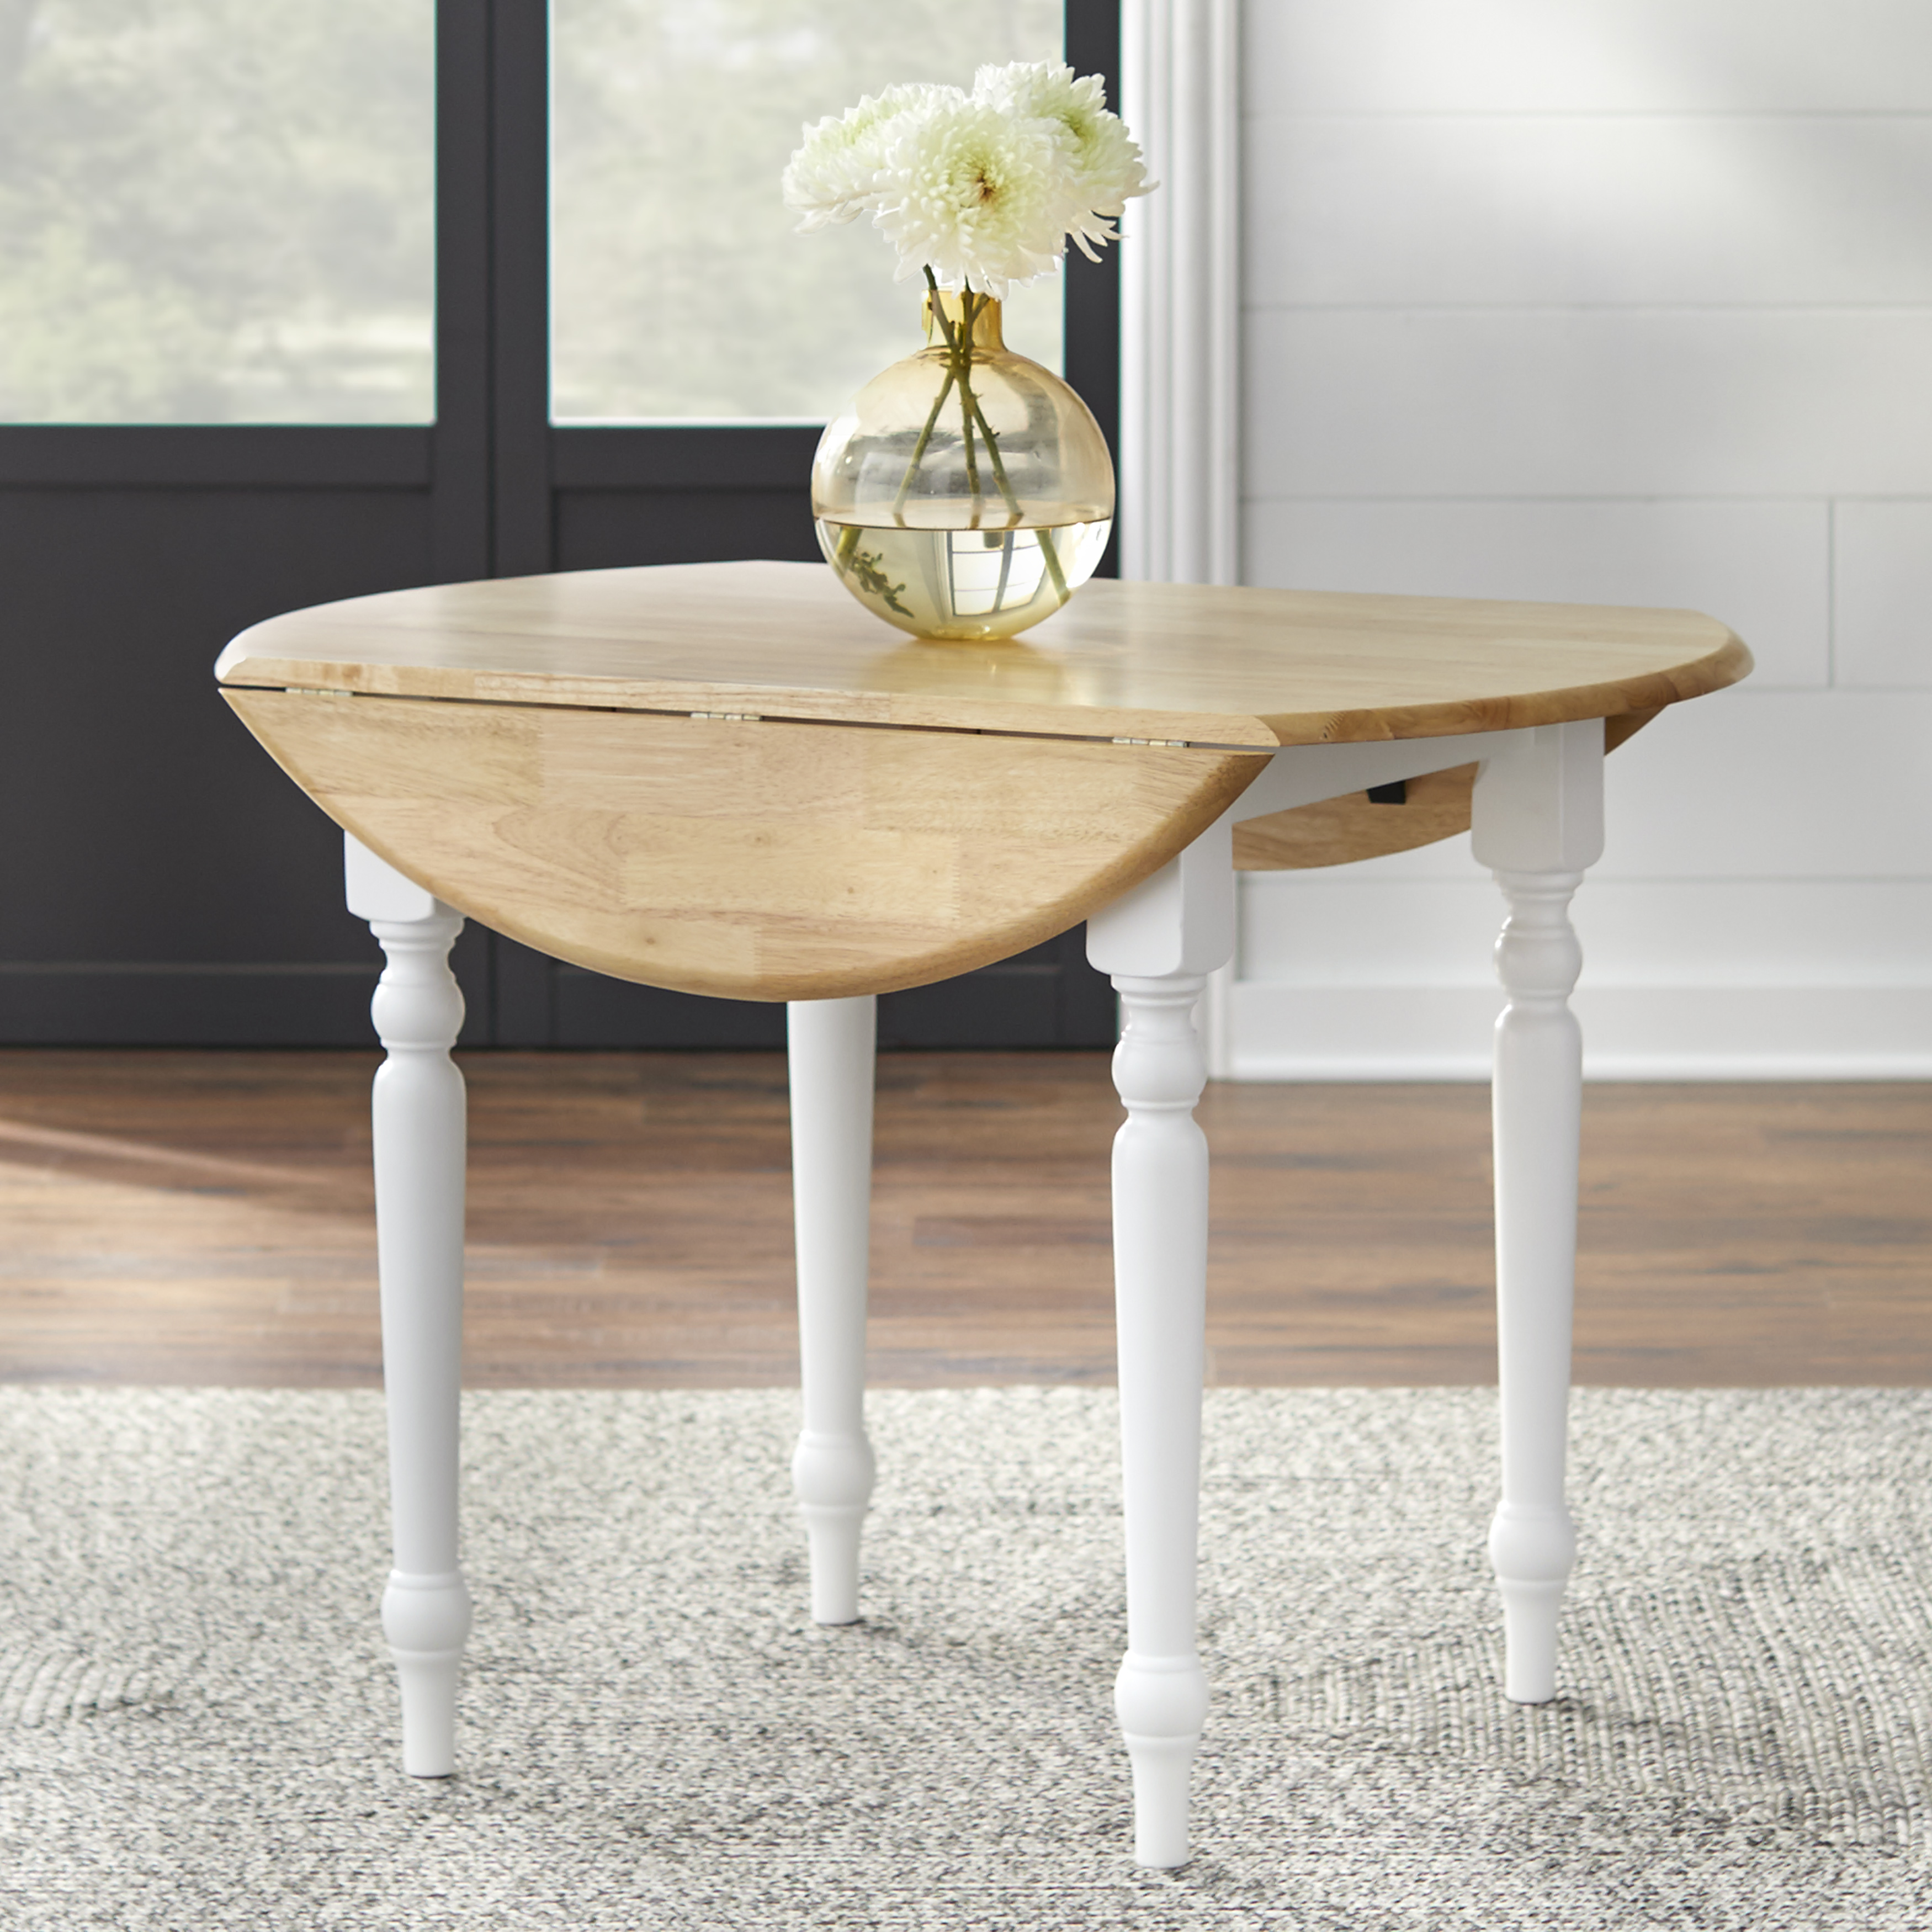 TMS Round Drop-Leaf Dining Table, White/Natural - image 2 of 5